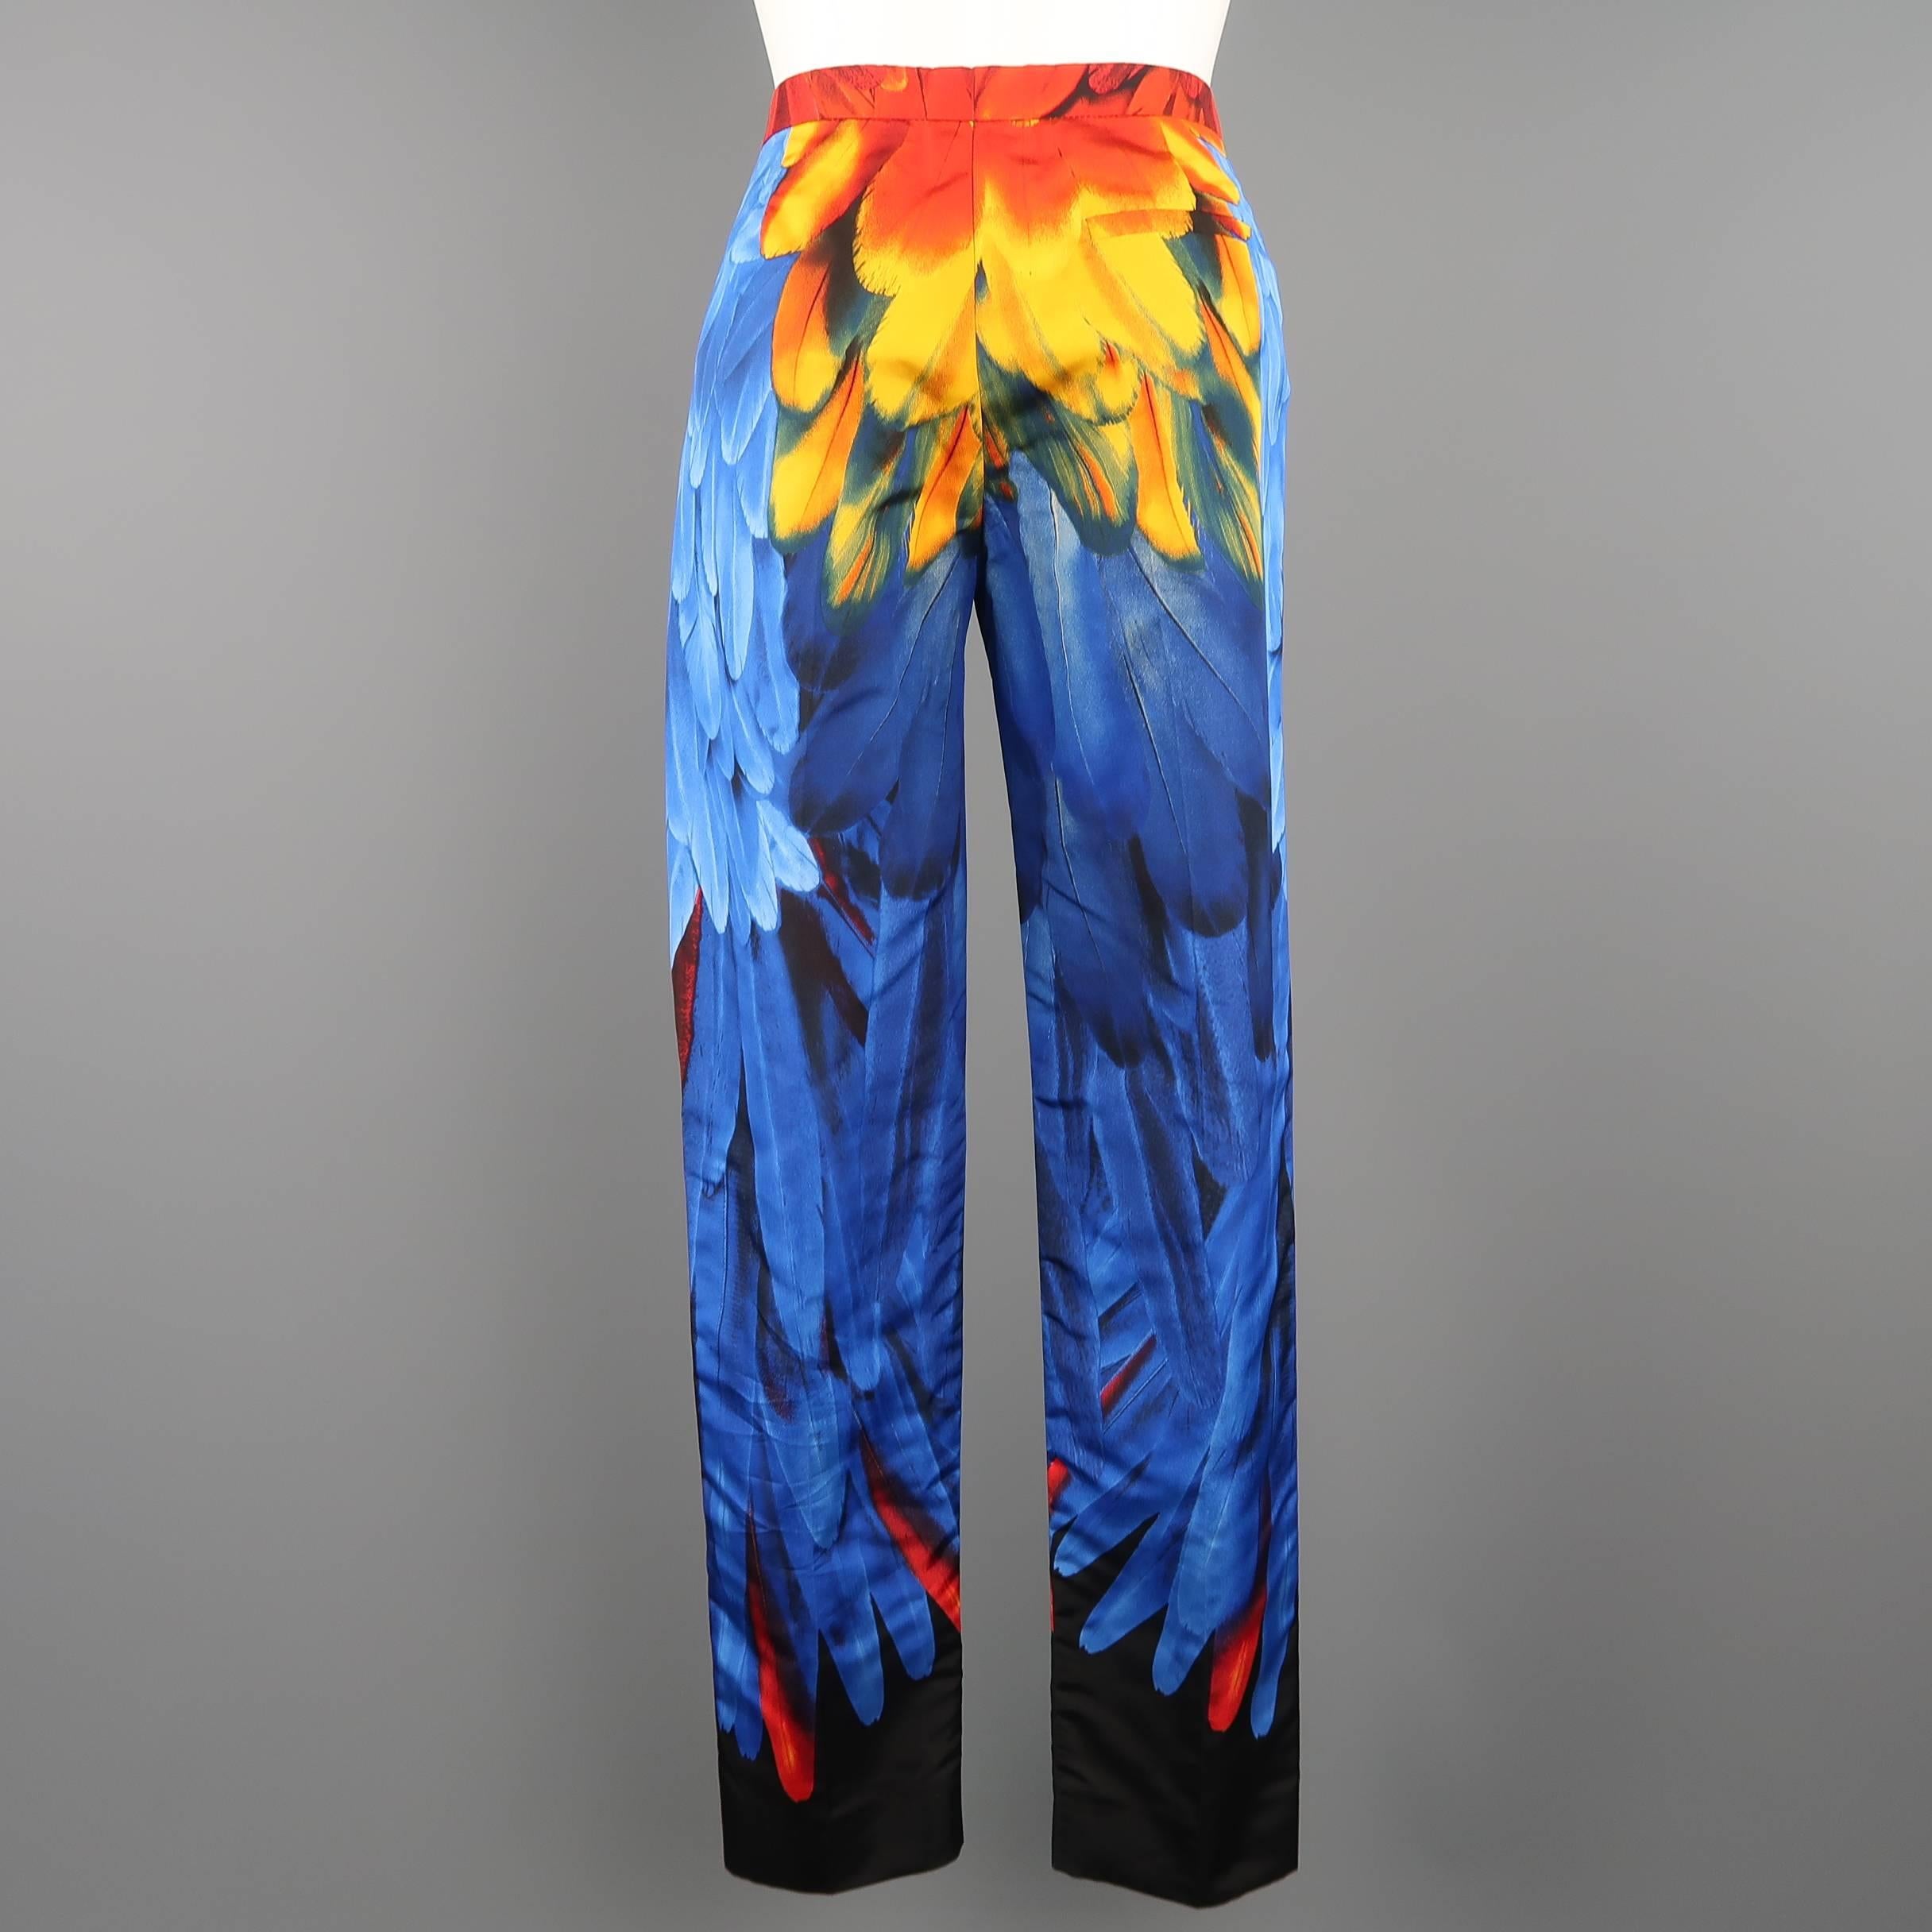 PRADA Pants - Spring 2005 Runway - Blue Red, Yellow Parrot Feather Silk Faille 3